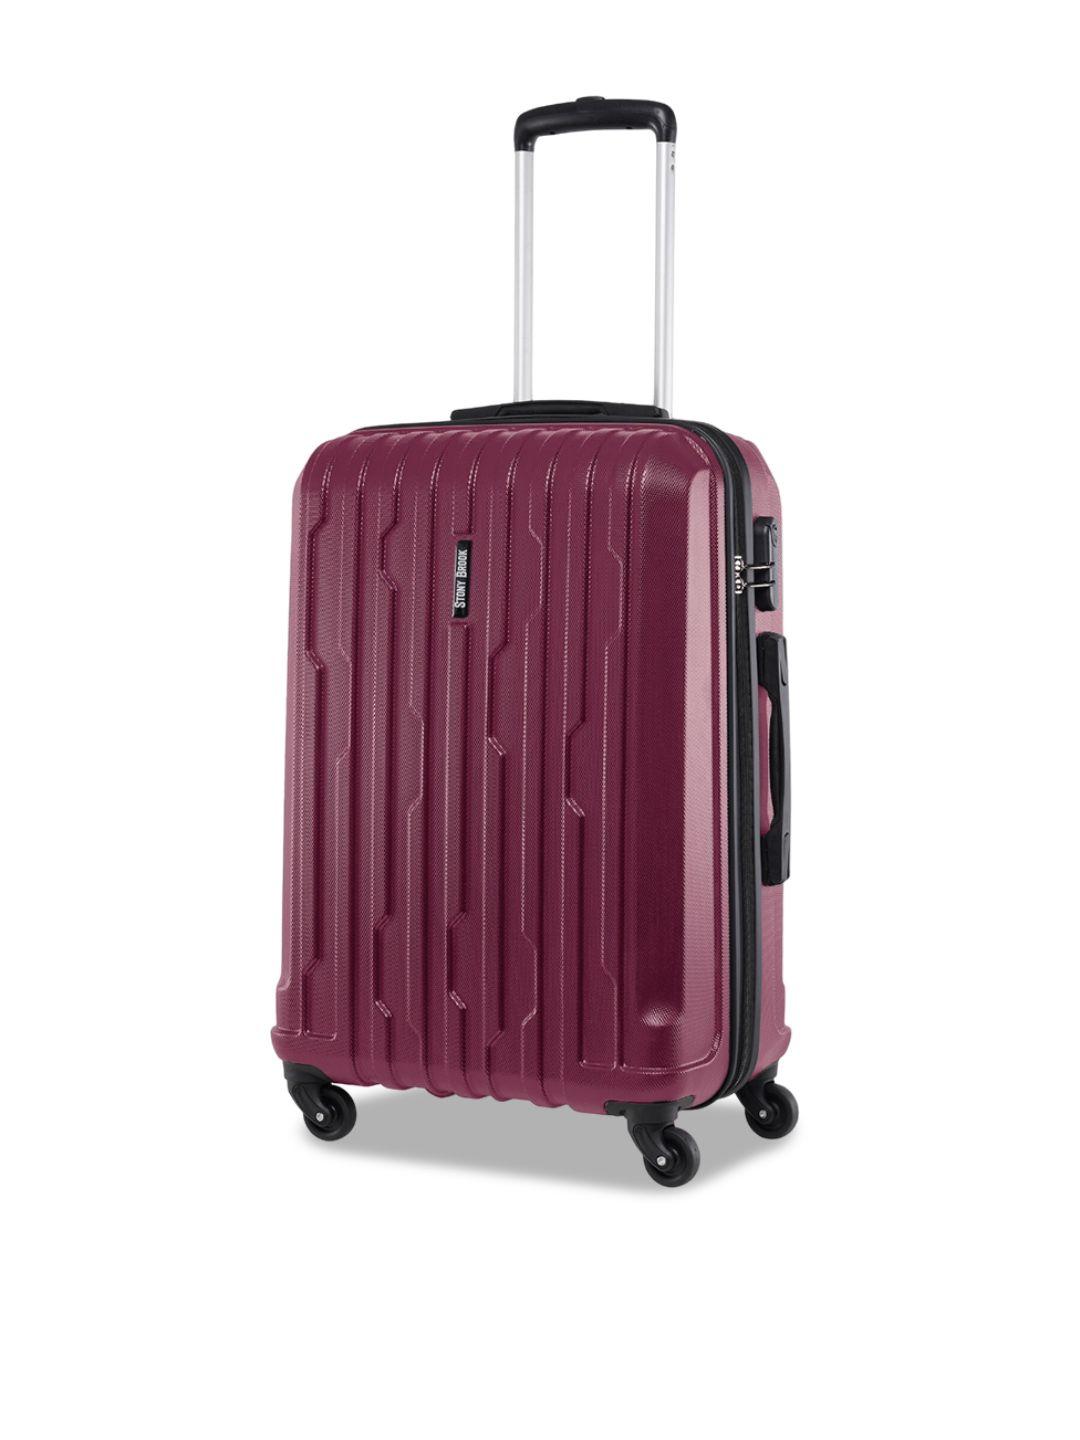 stony brook by nasher miles hard-sided large trolley suitcase